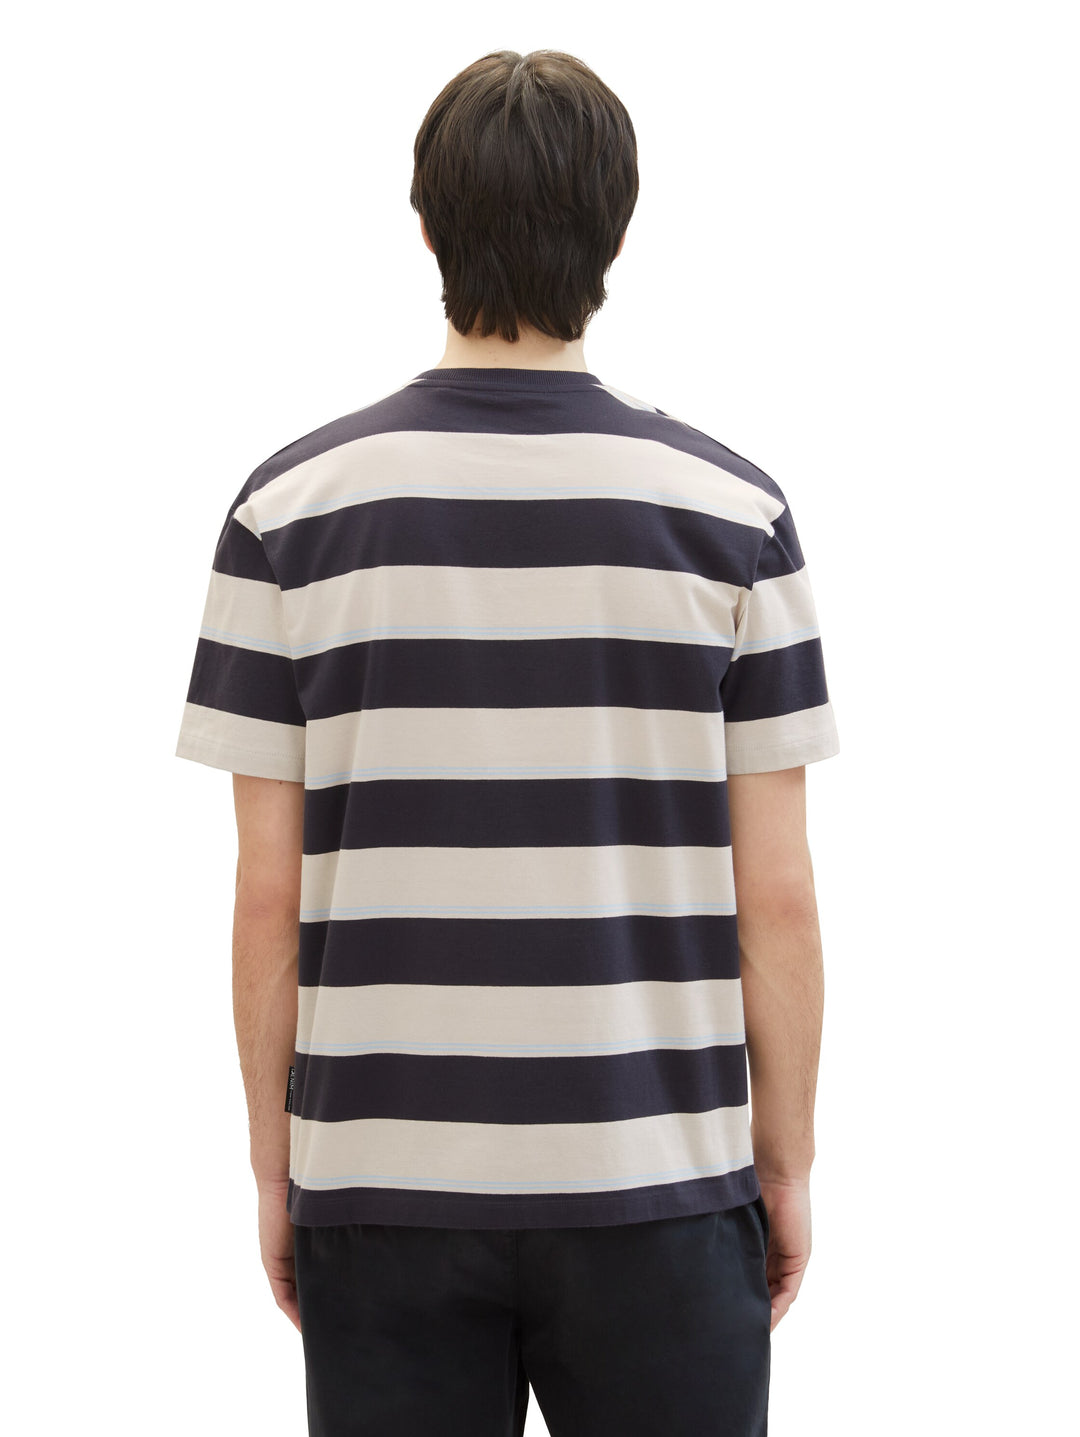 RELAXED STRIPED T-SHIRT